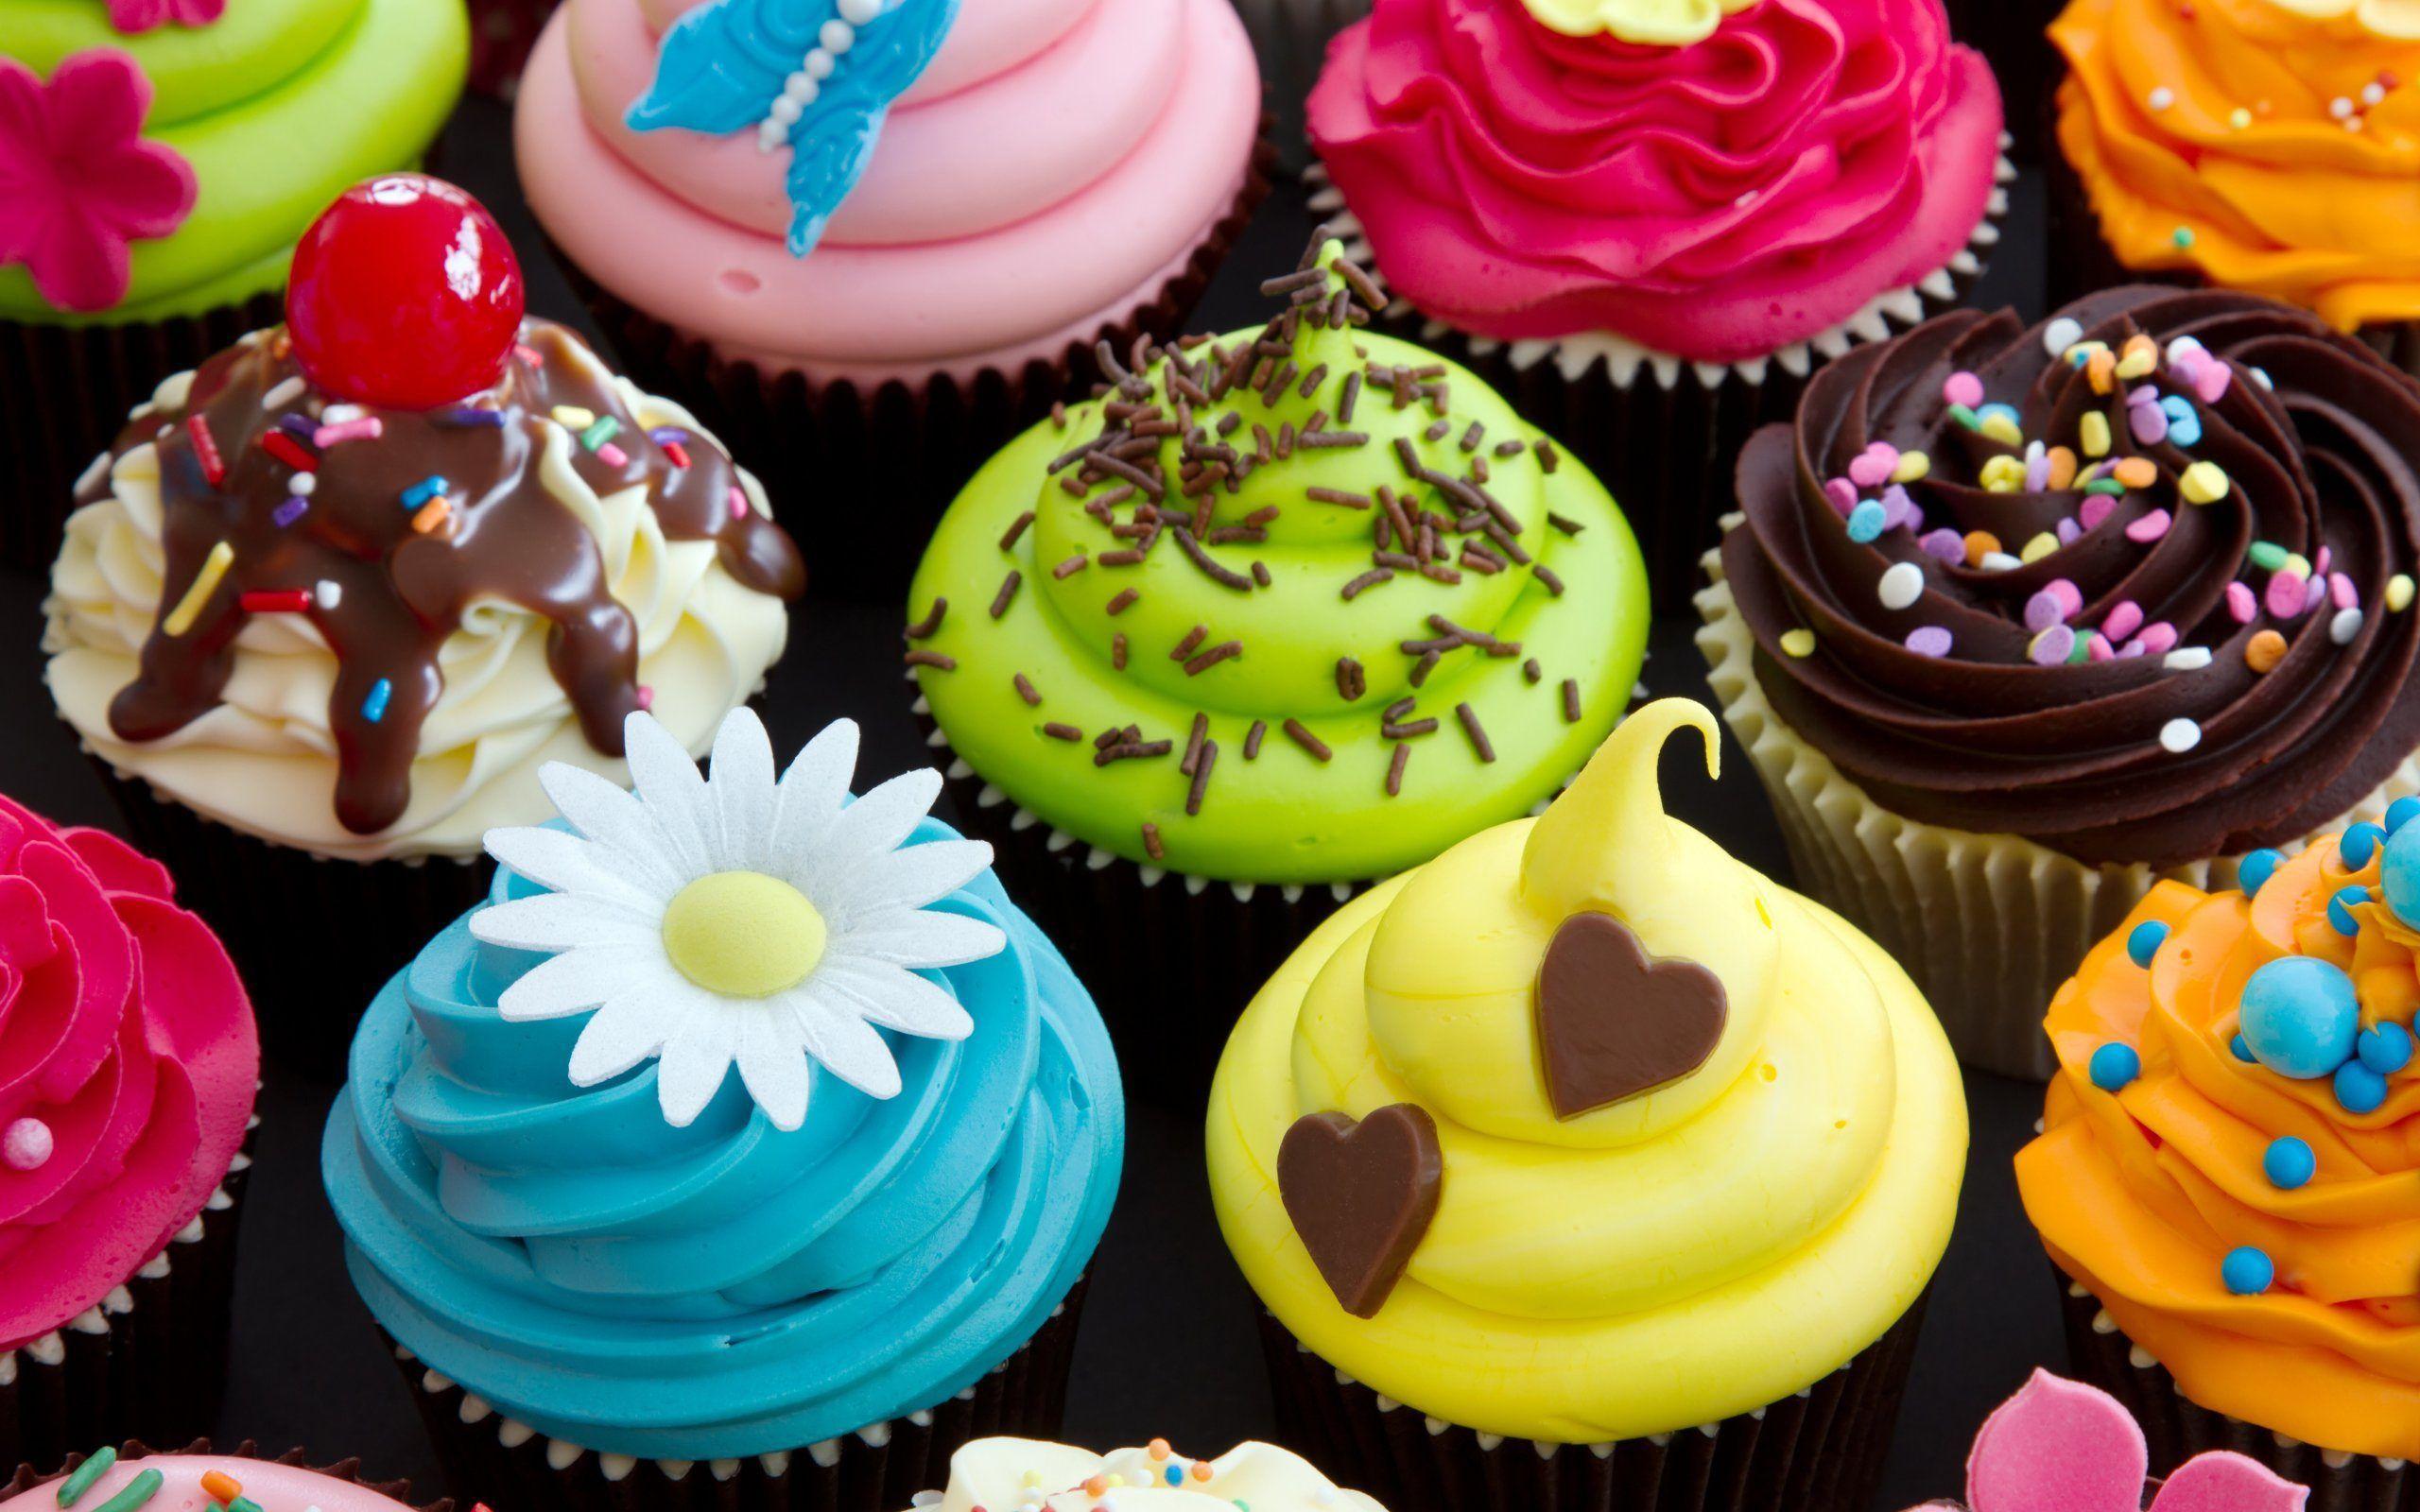 Colorful Cakes HD Wallpaper Downoad Desktop Of Cup Cakes